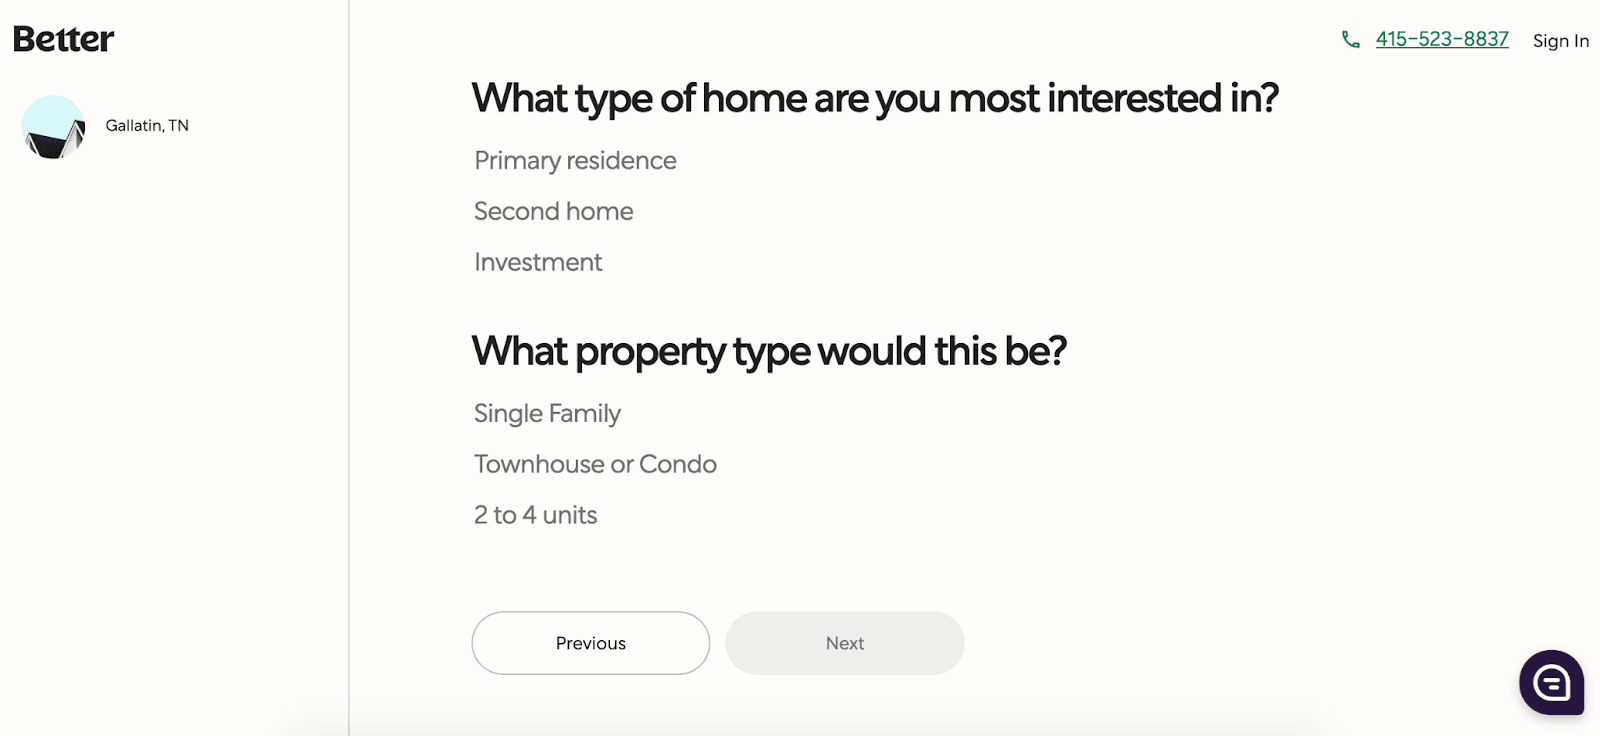 Better.com: Affordable Mortgages In An Easy-to-Use Platform - What type of home are you most interested in?